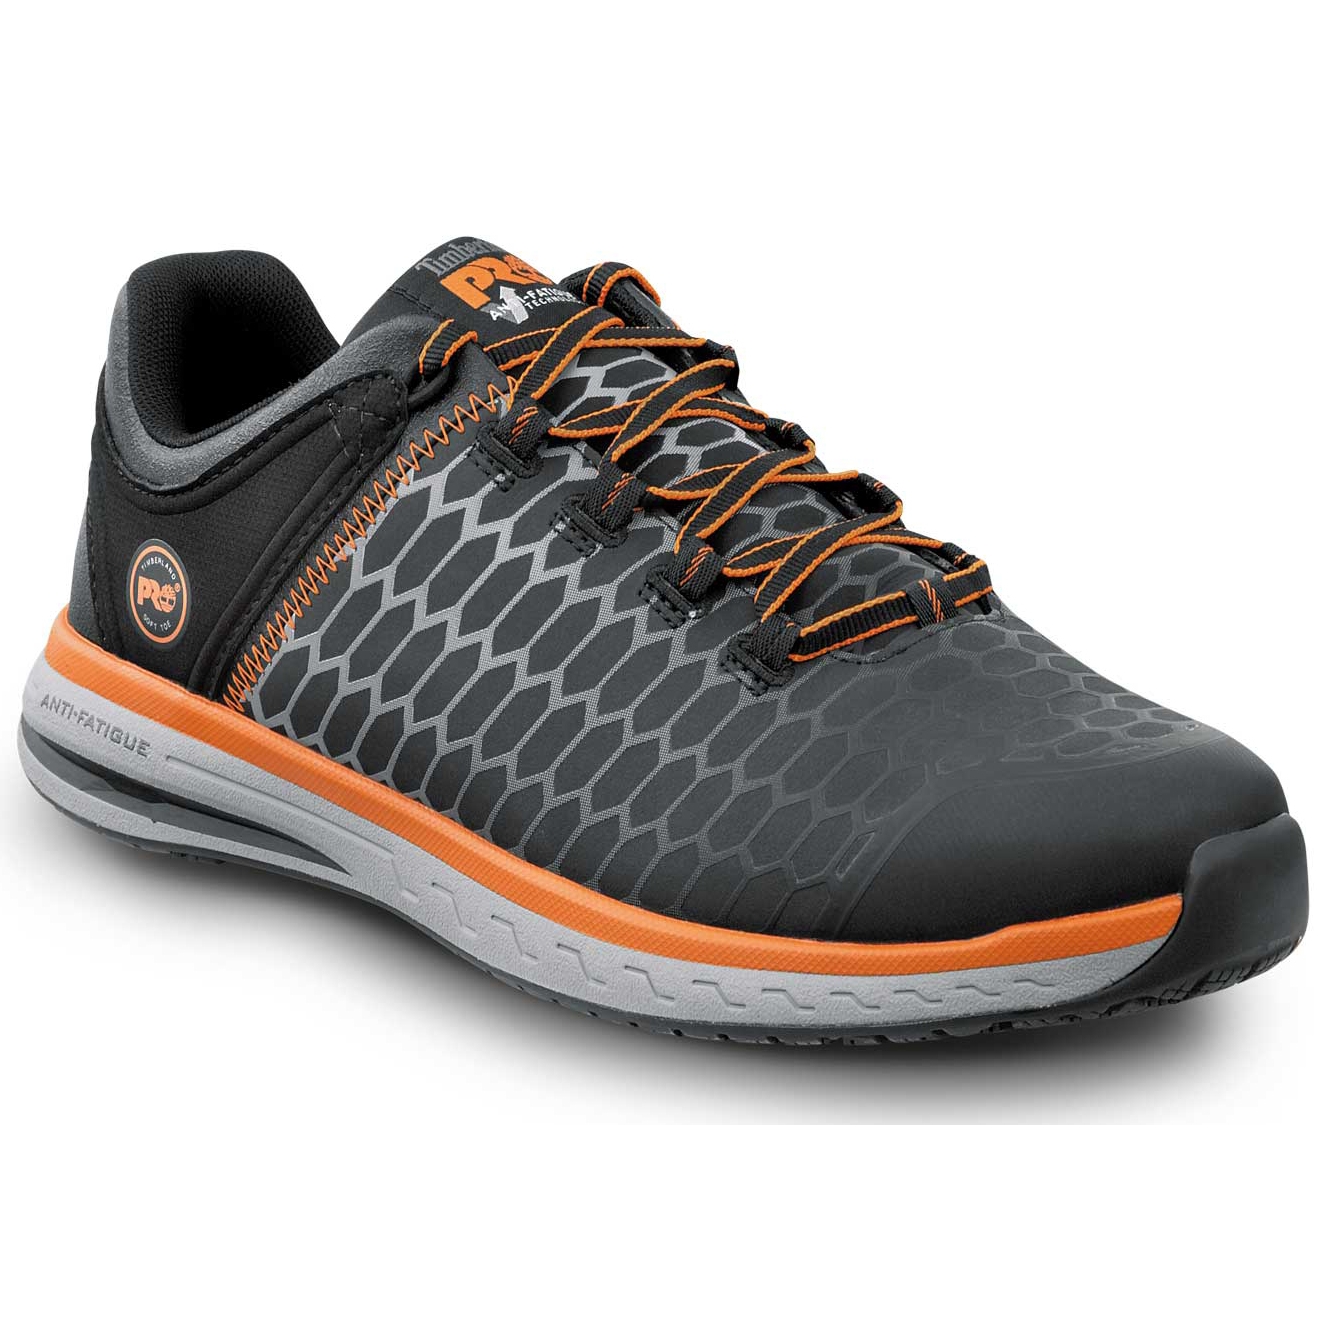 acento recinto Boquilla SR Max | STMA1XRK Timberland PRO Men's Powerdrive Soft Toe EH Low Athletic